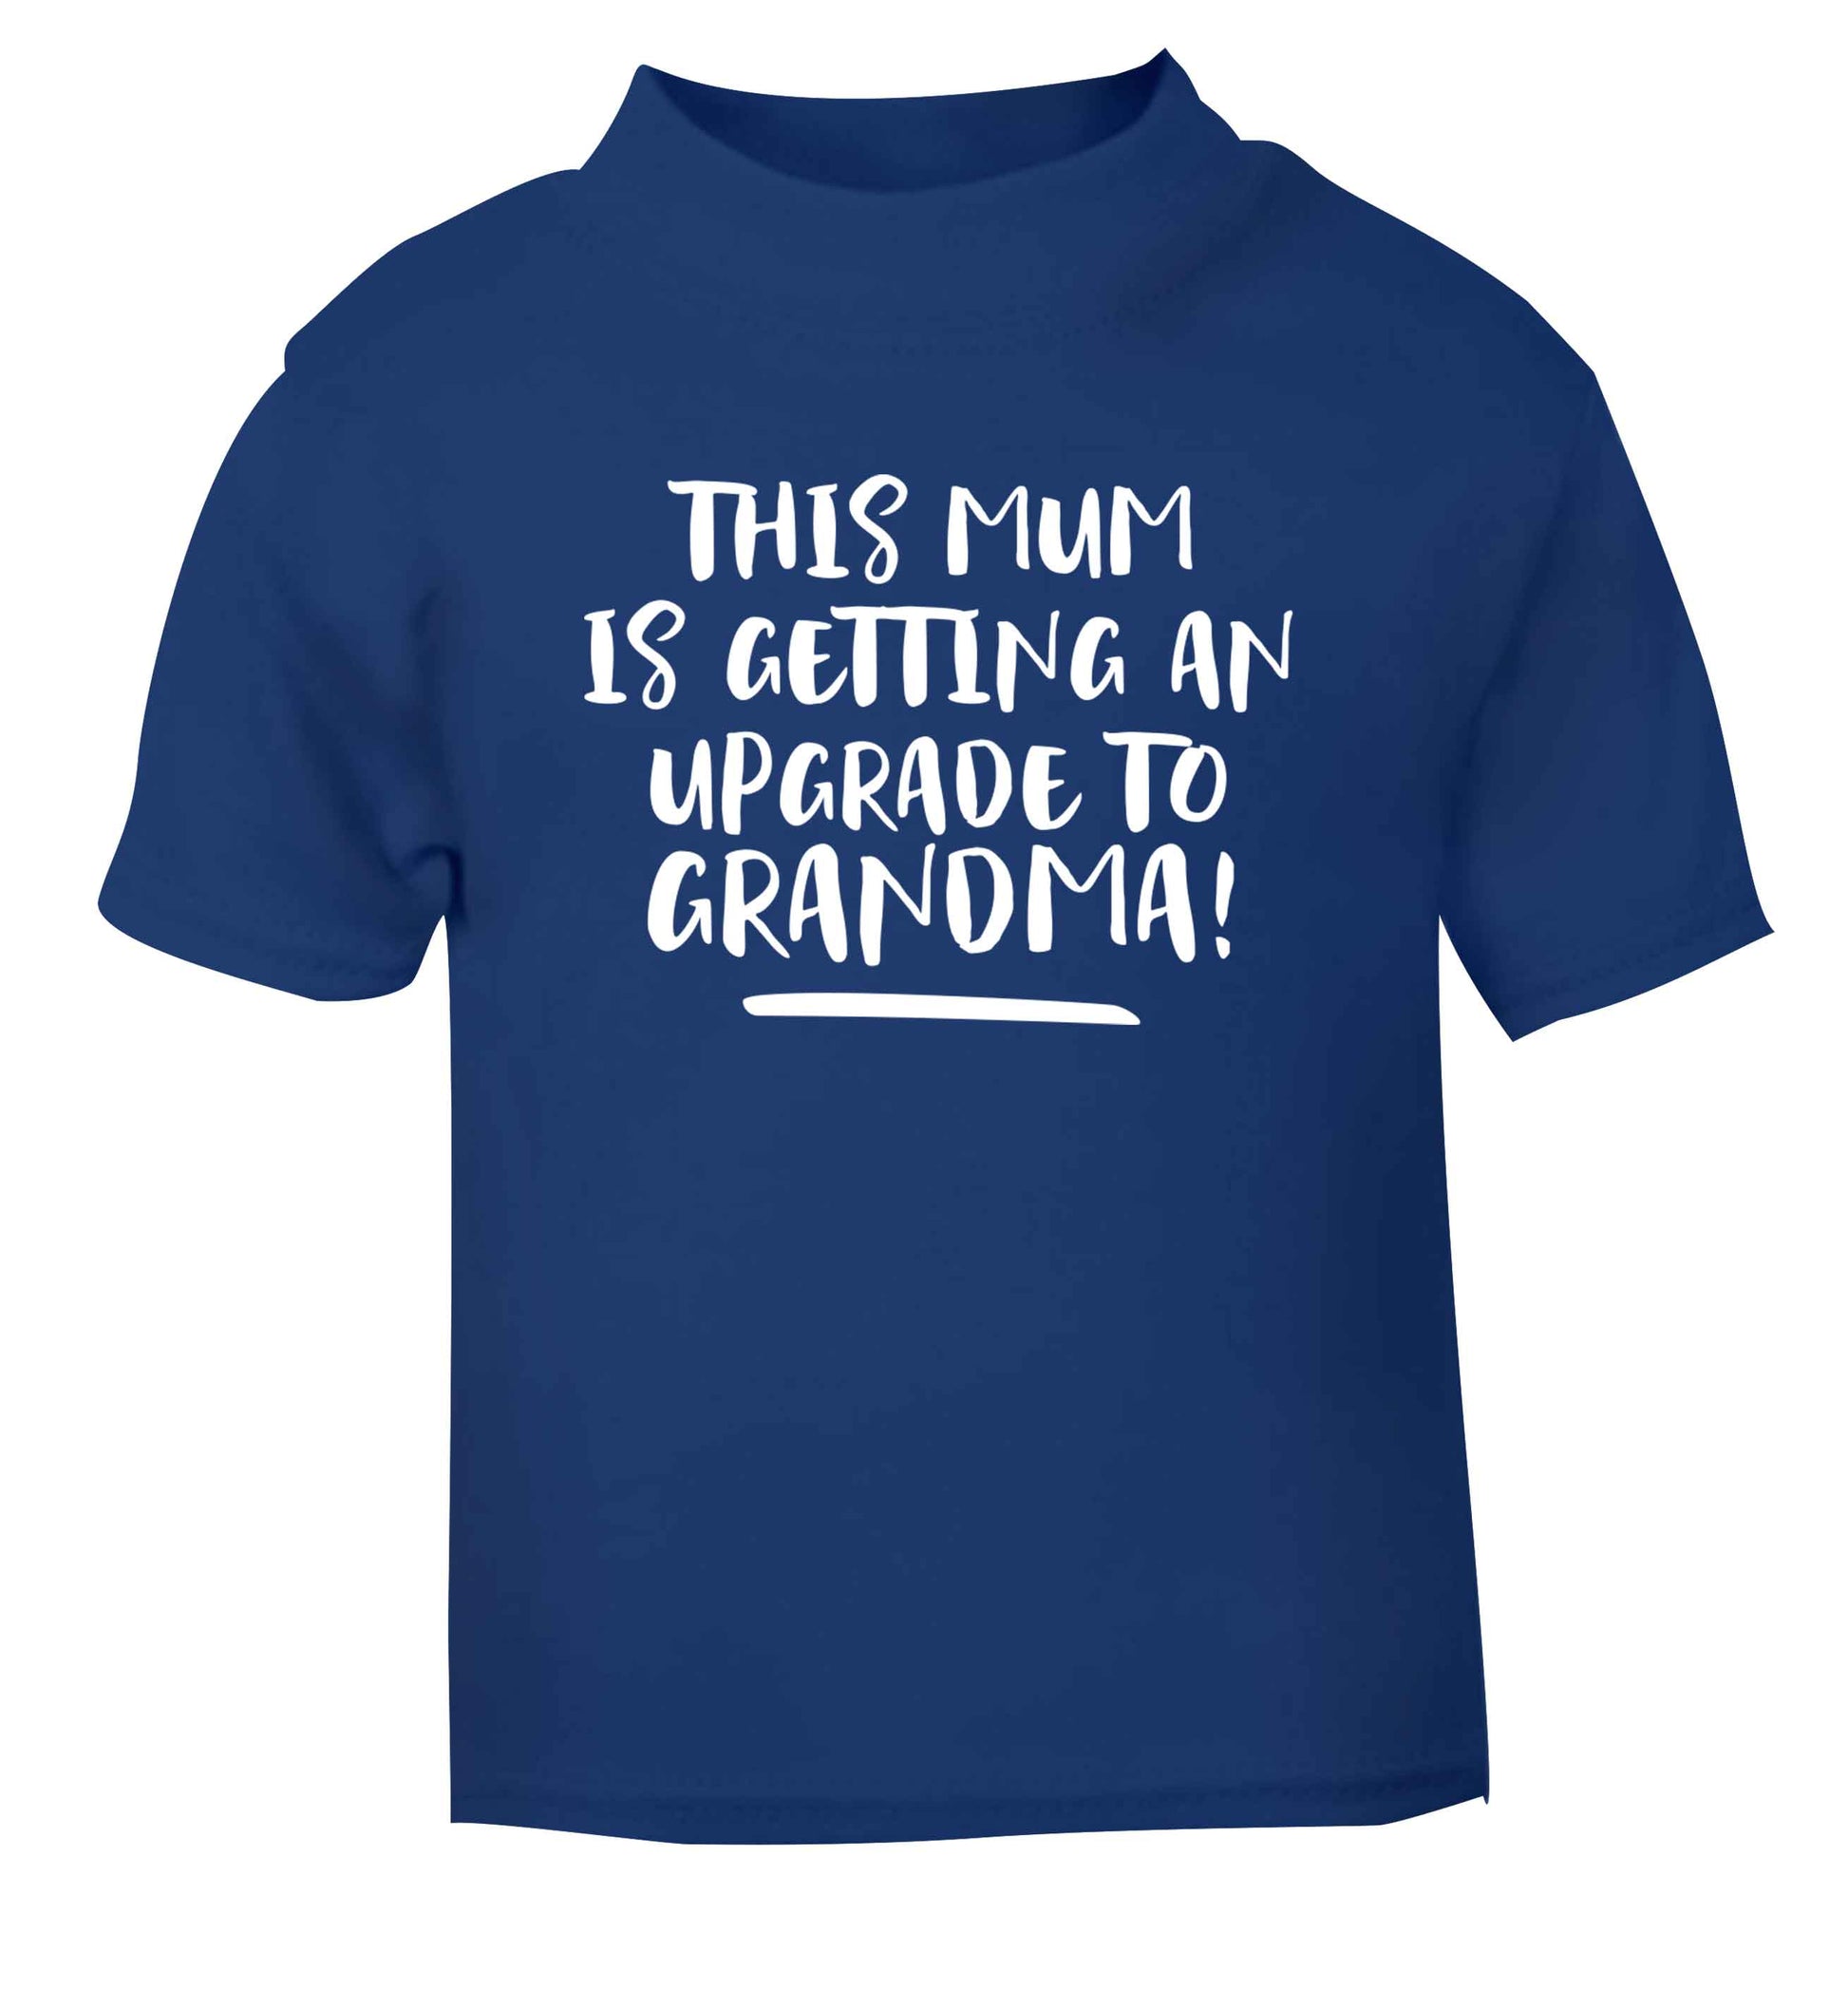 This mum is getting an upgrade to grandma! blue Baby Toddler Tshirt 2 Years